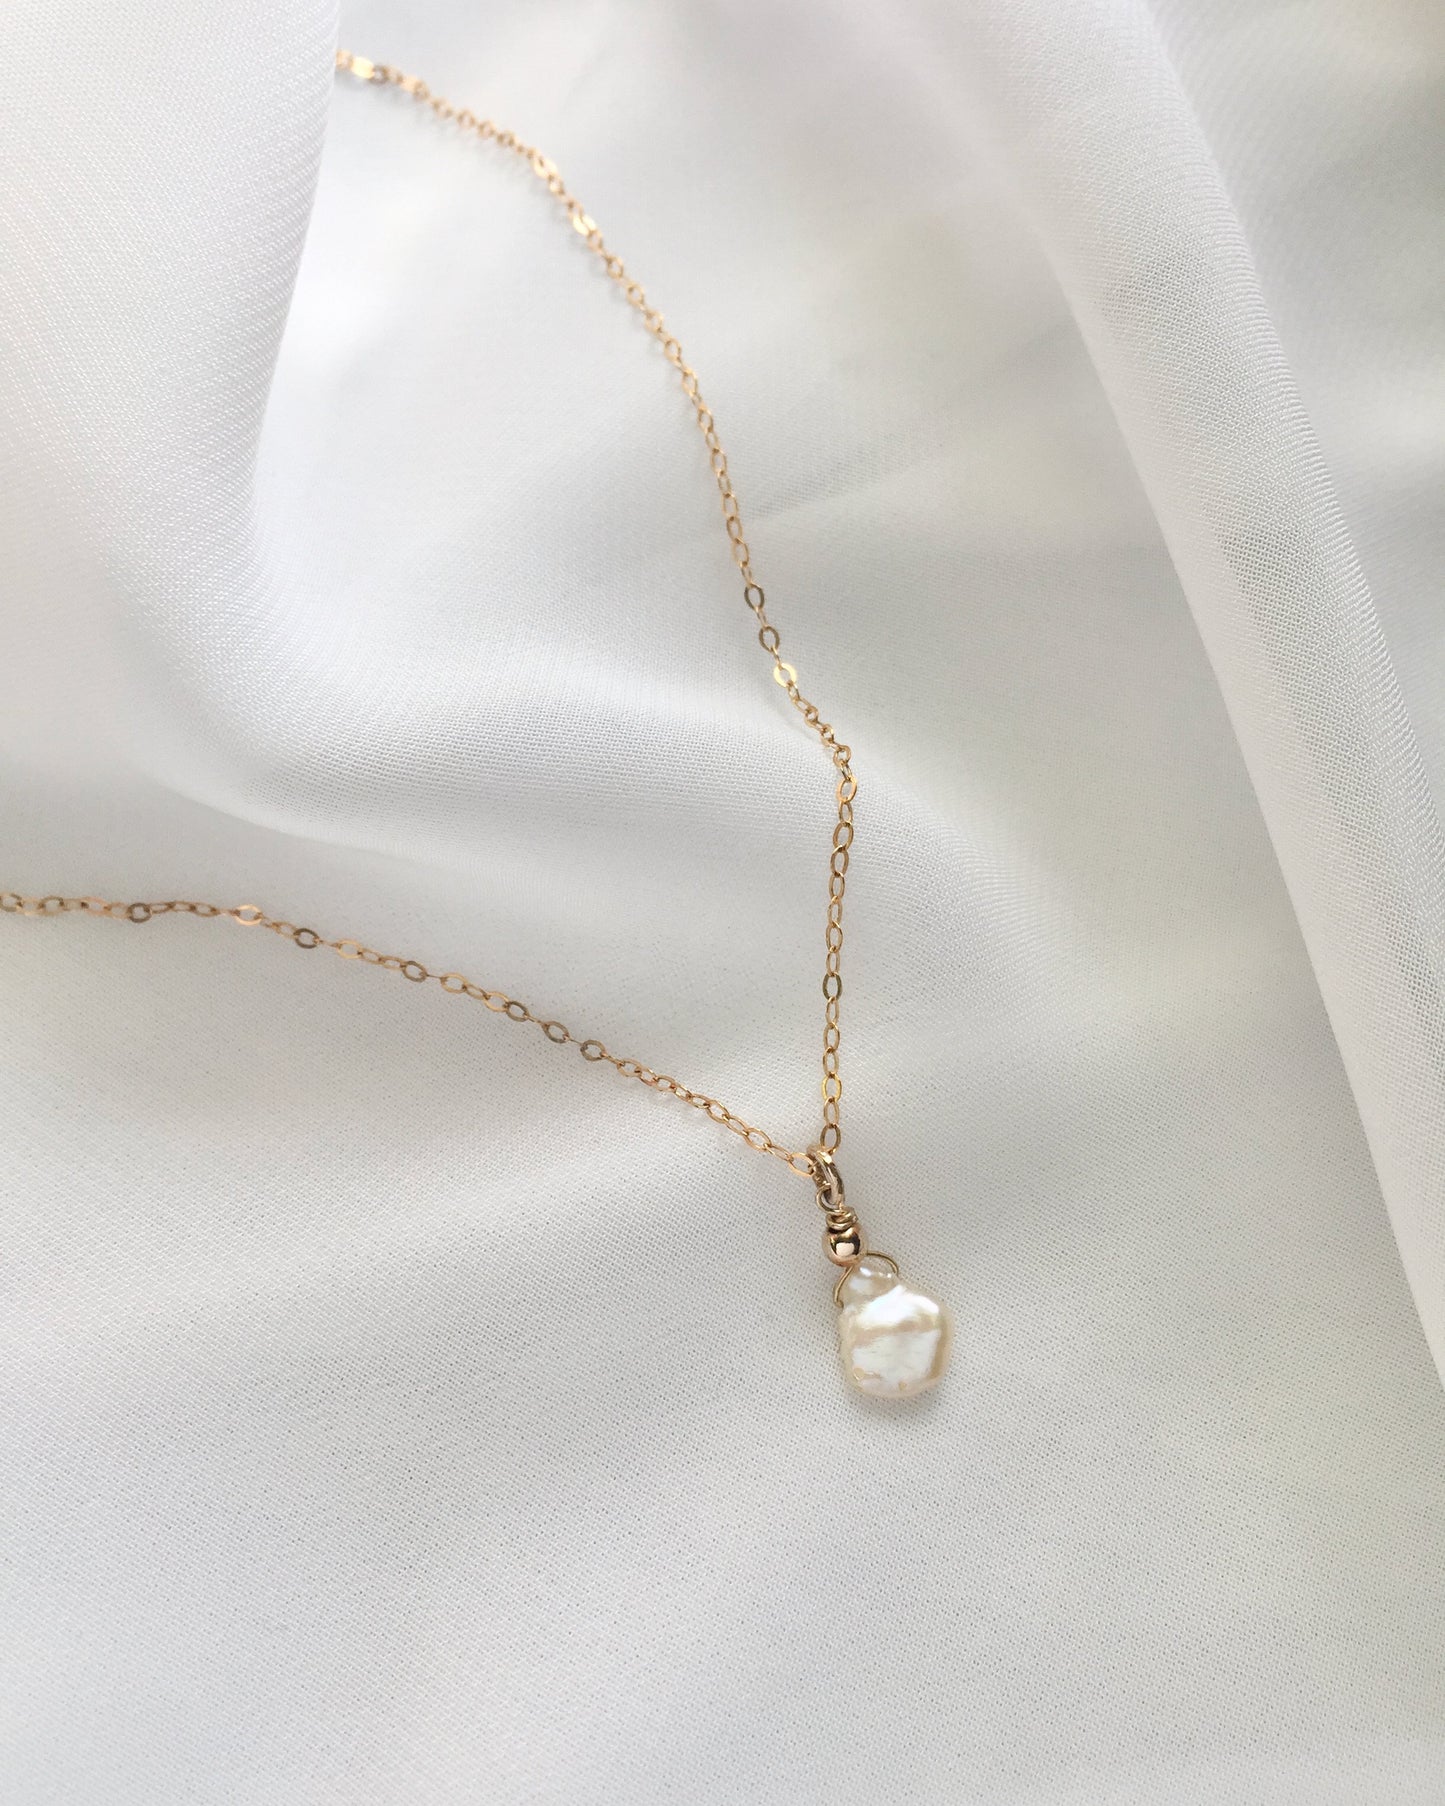 50th Birthday Necklace | 50th Birthday Jewelry For Mom | Delicate Pearl Necklace In Gold Filled or Sterling Silver | IB Jewelry